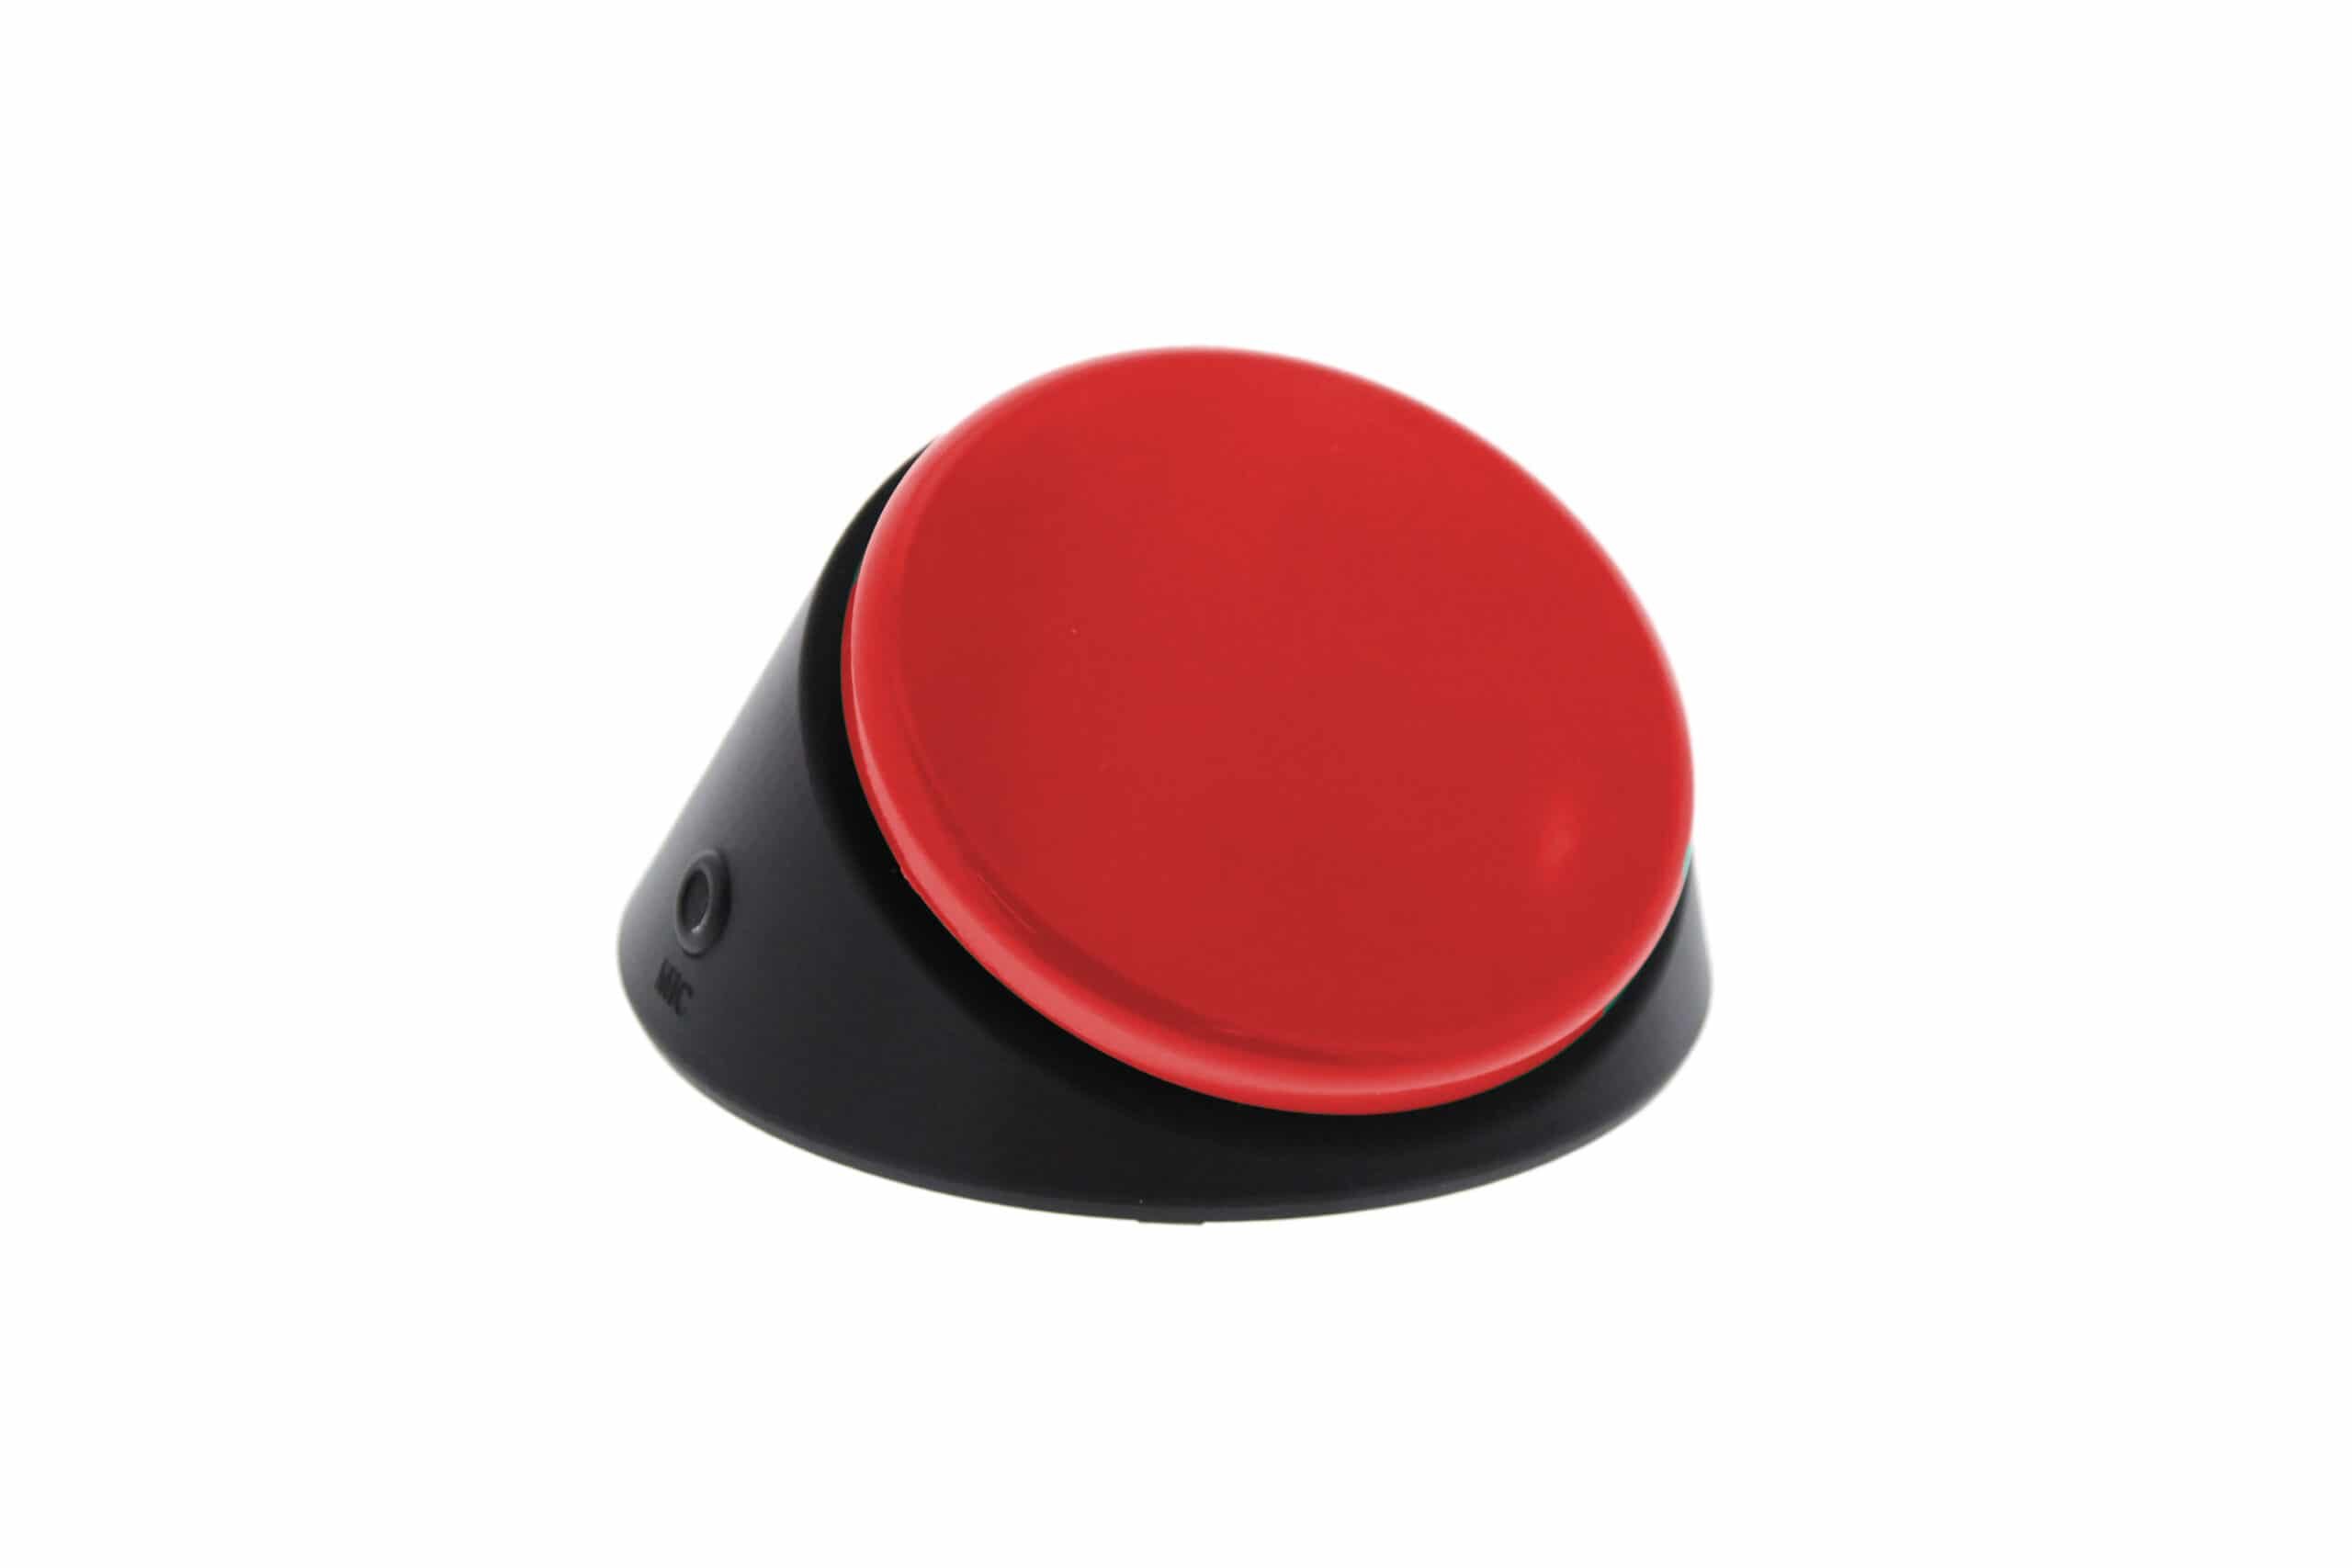 Red button and black base for communicating.